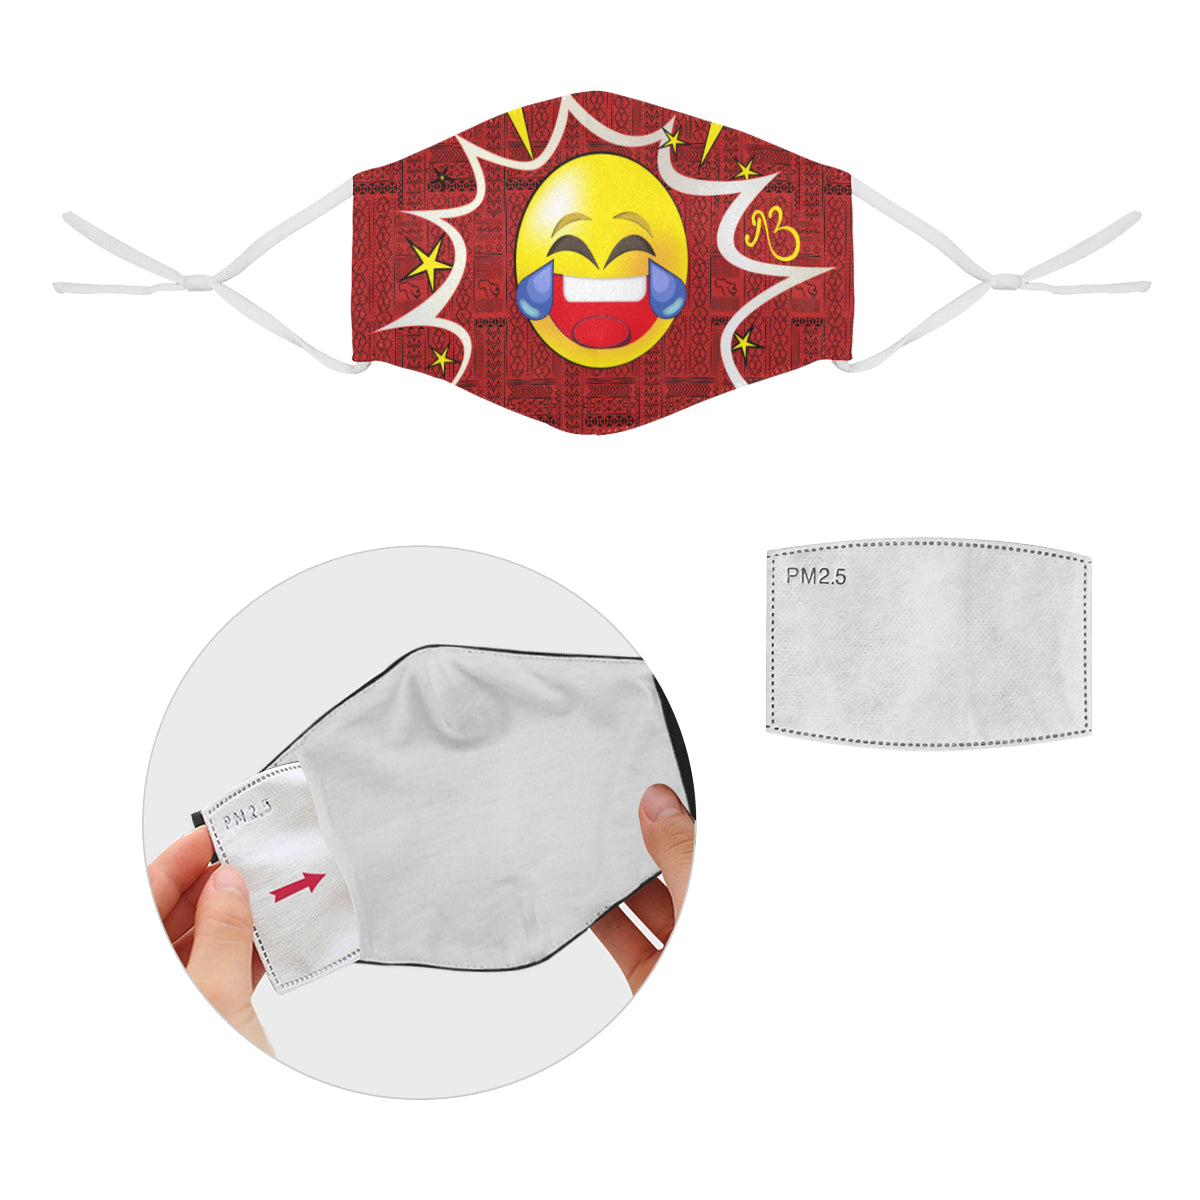 LOL Tribal Print Comic Emoji Cotton Fabric Face Mask with Filter Slot and Adjustable Strap - Non-medical use (2 Filters Included)